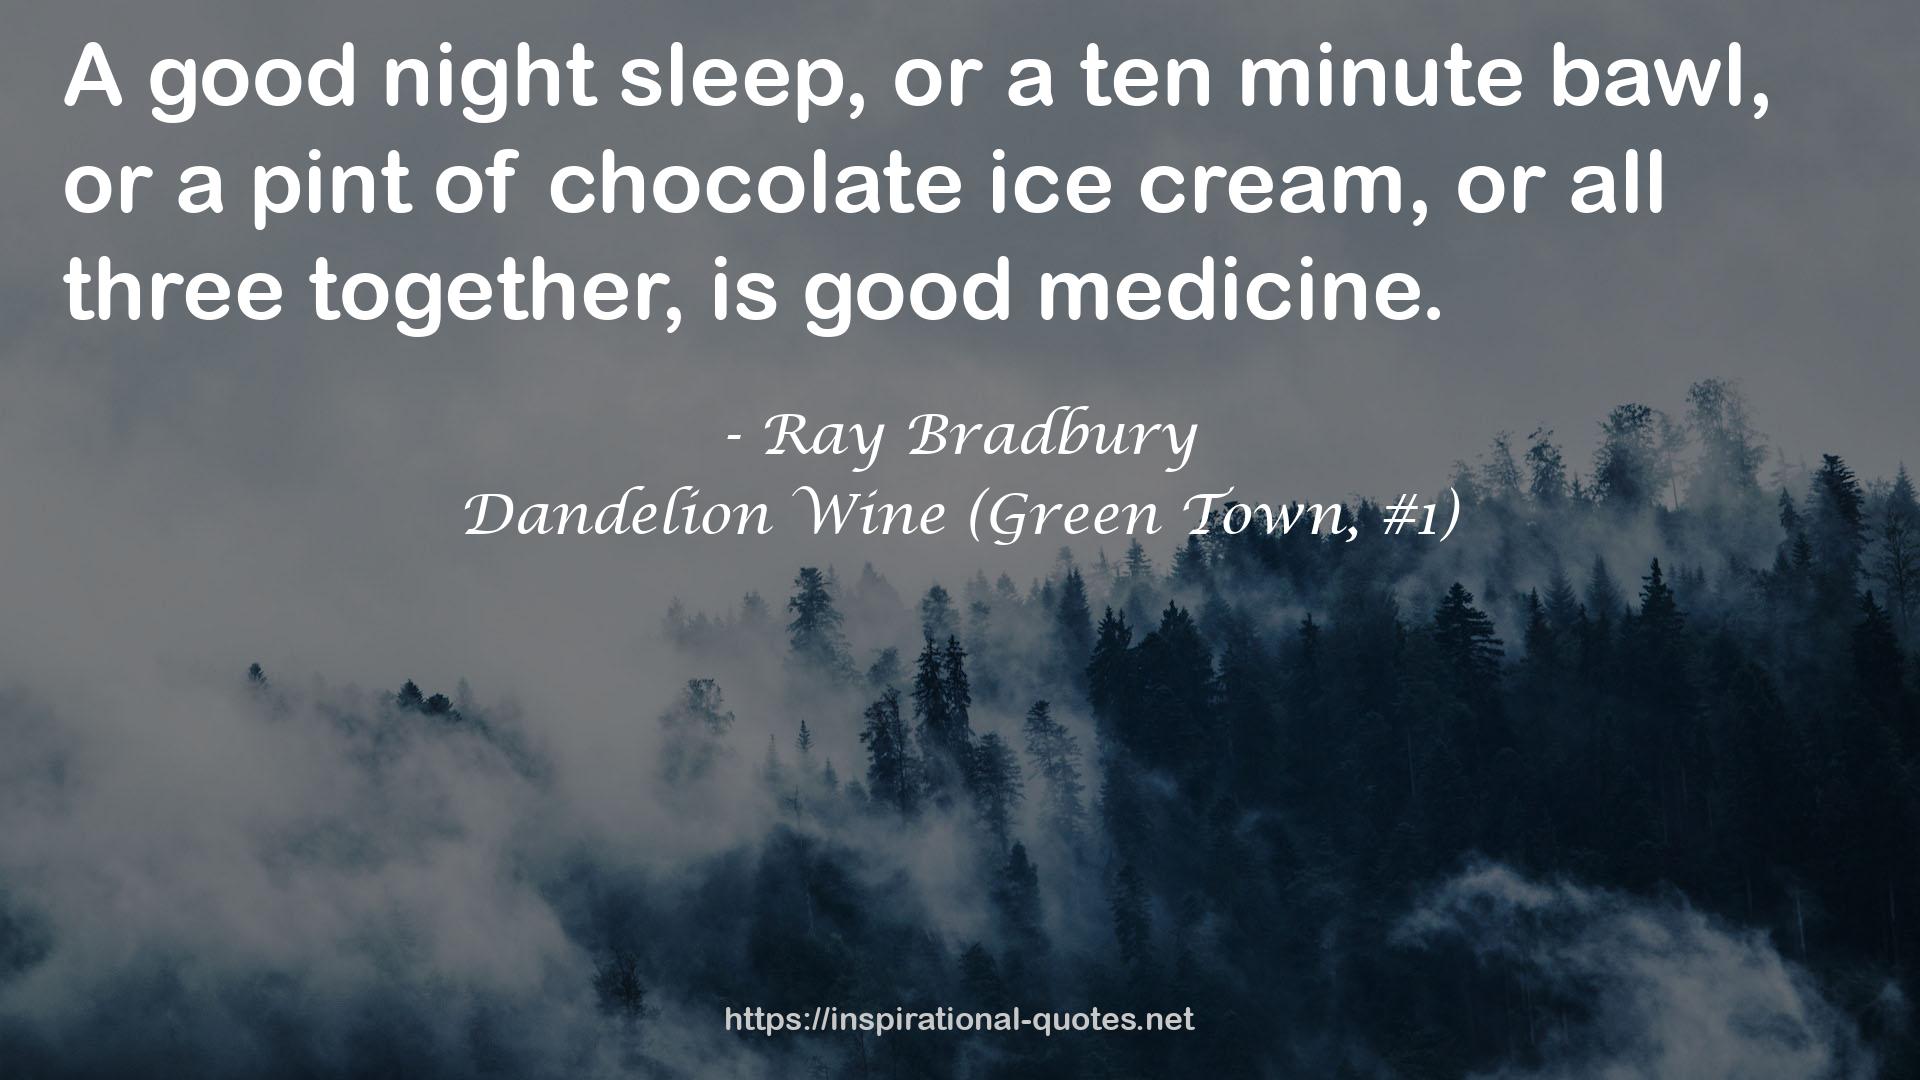 Dandelion Wine (Green Town, #1) QUOTES